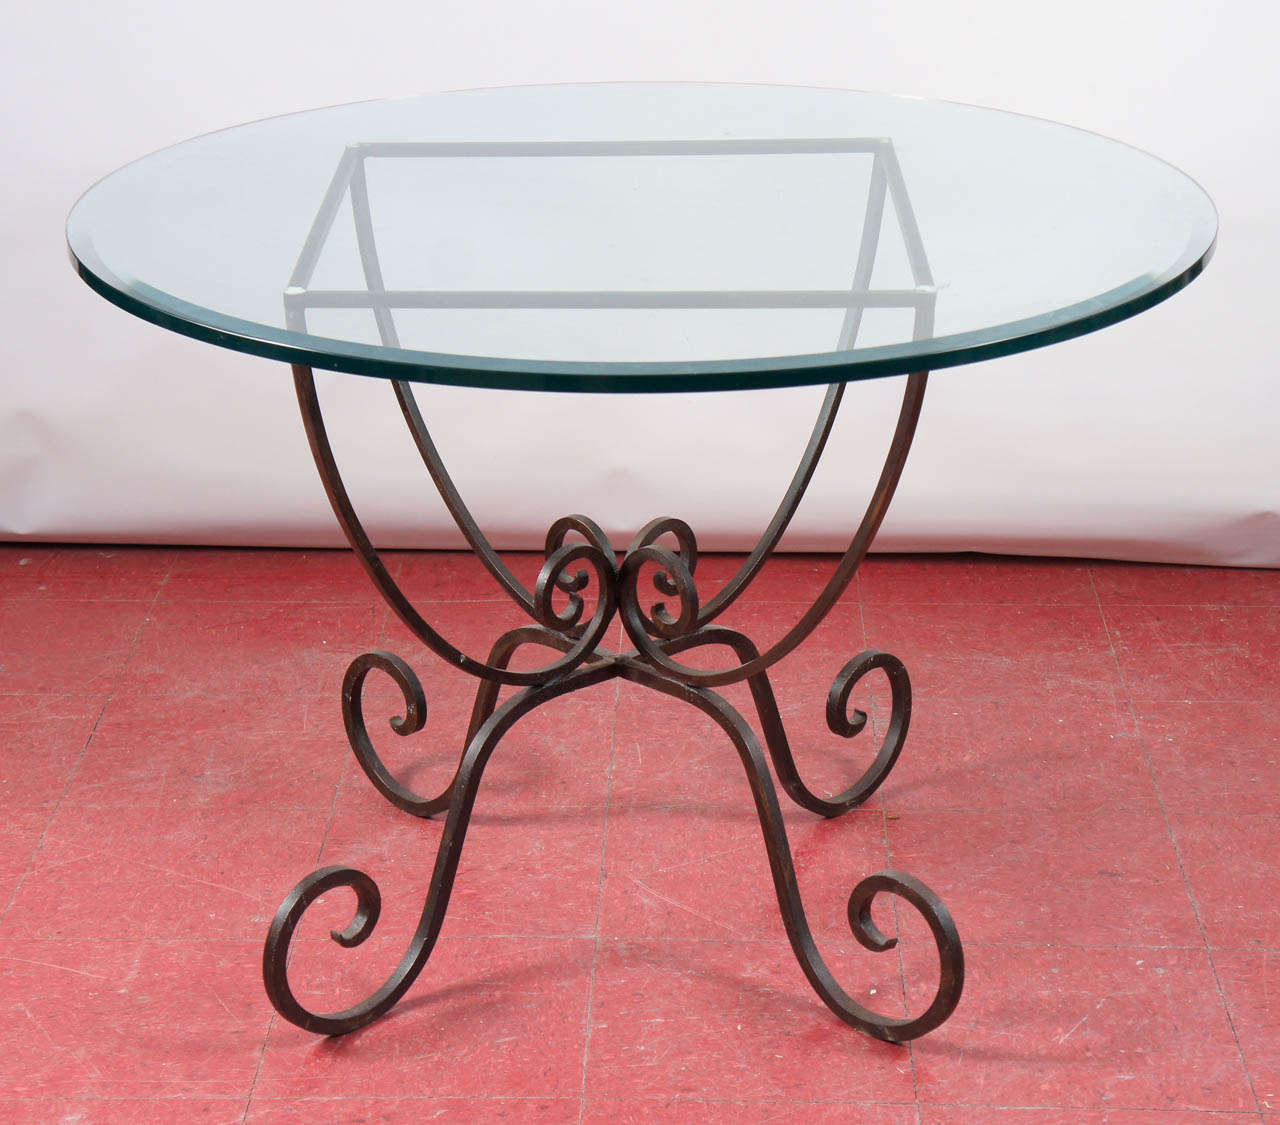 Round or square indoor or patio table.  Metal base with curled legs, gently curved support for glass top.  Table base measures 24 x 24 x 29